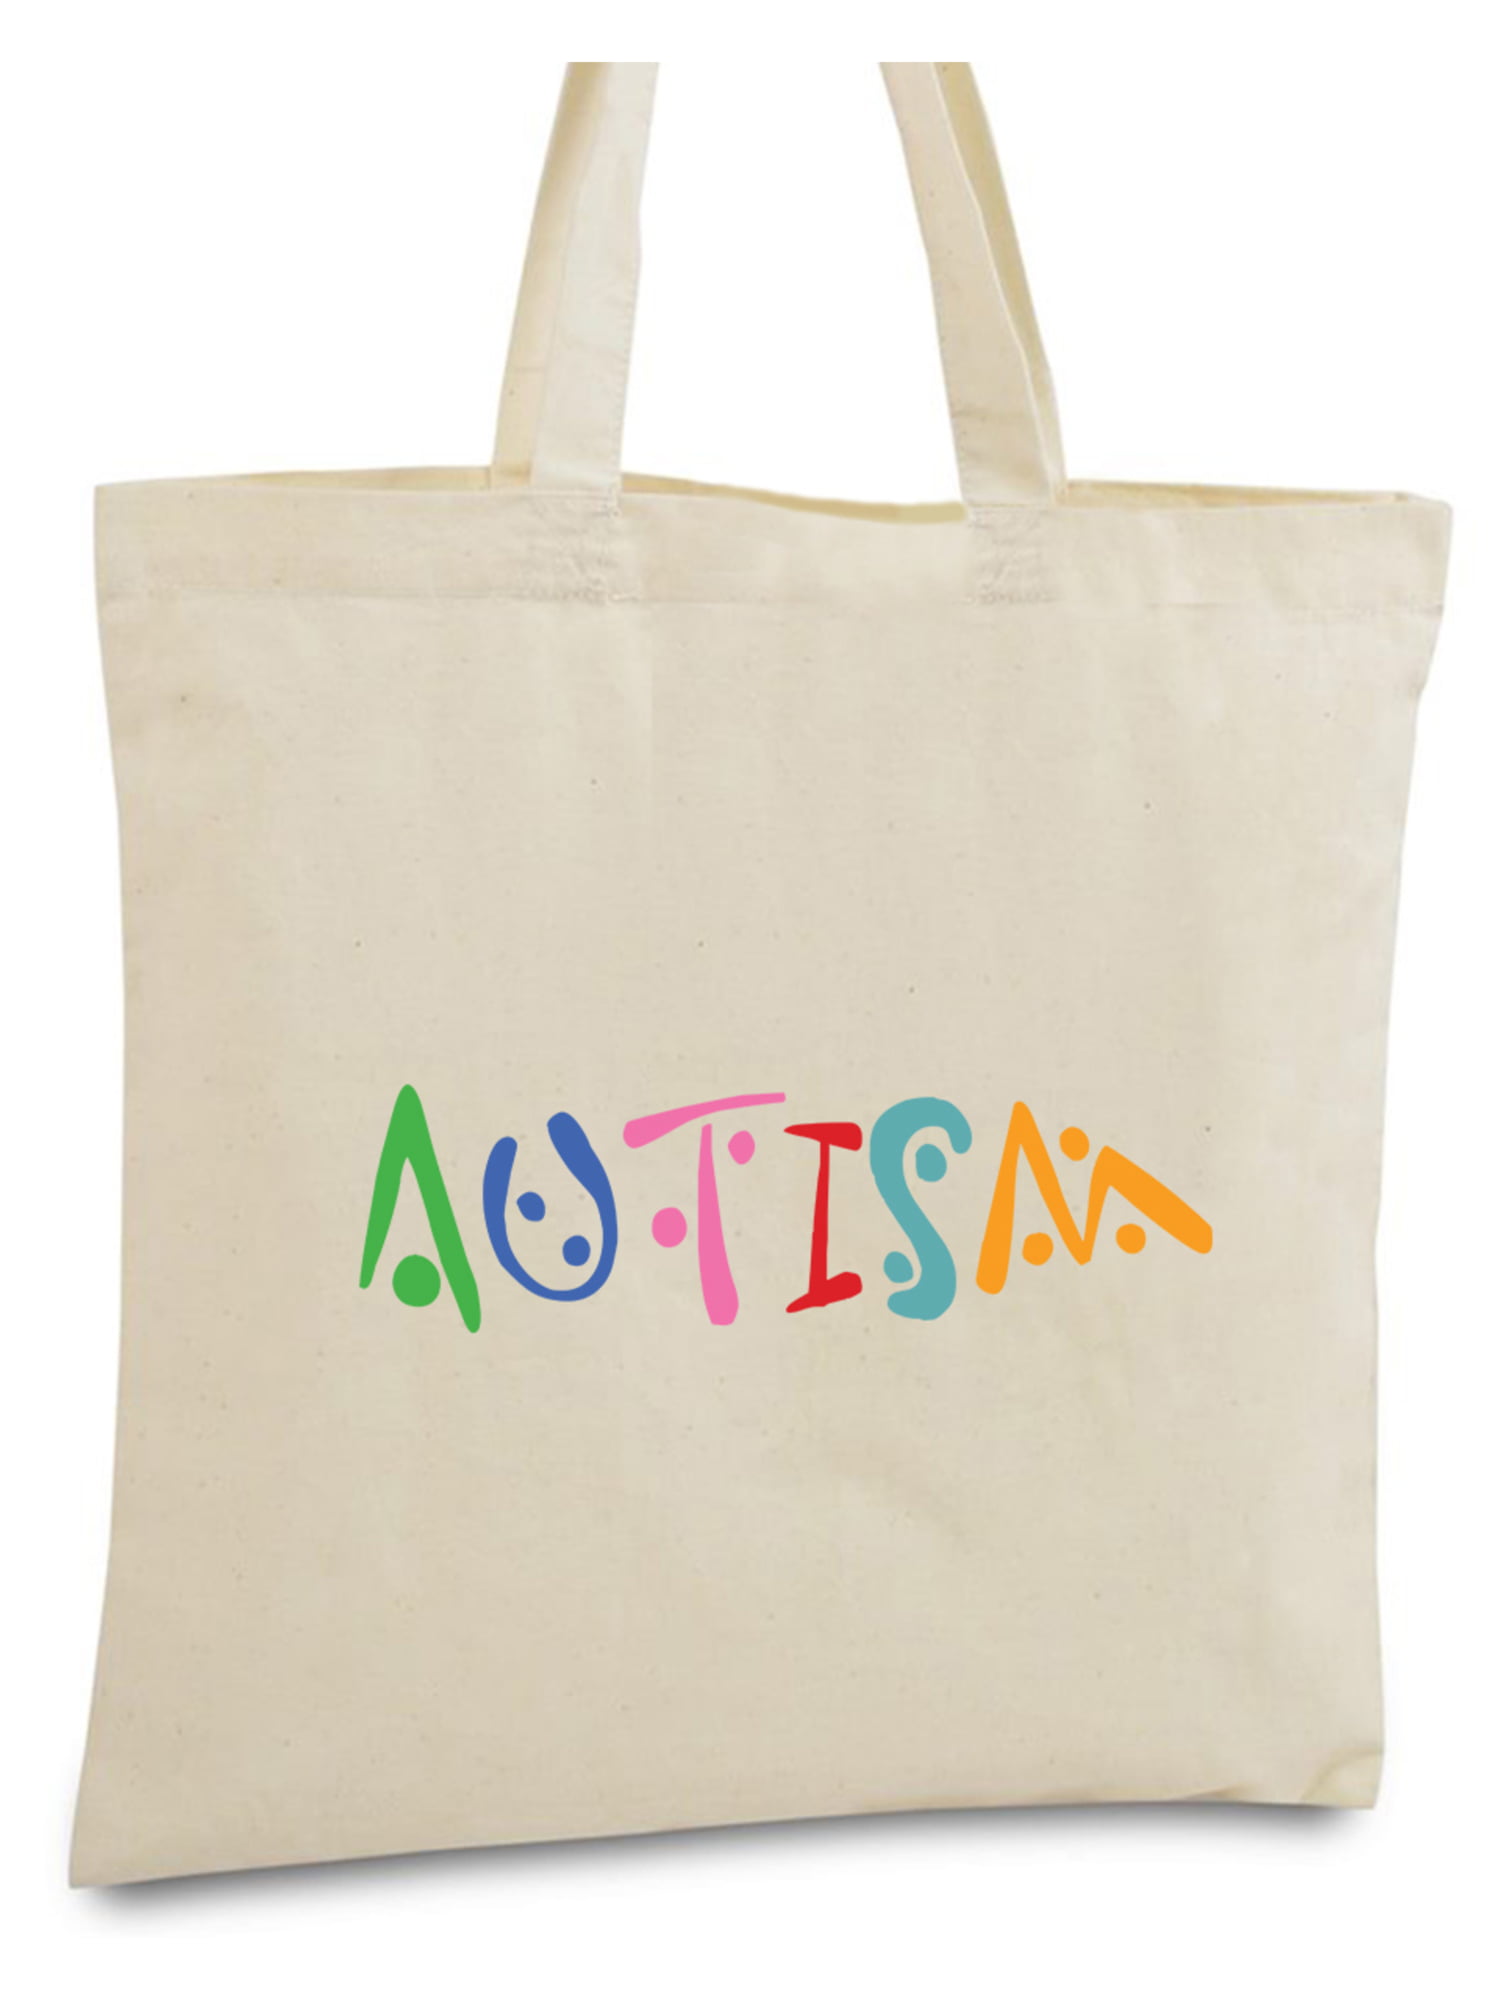 CANVAS BAG Hope AUTISM TOTE SHOPPING BAGS 